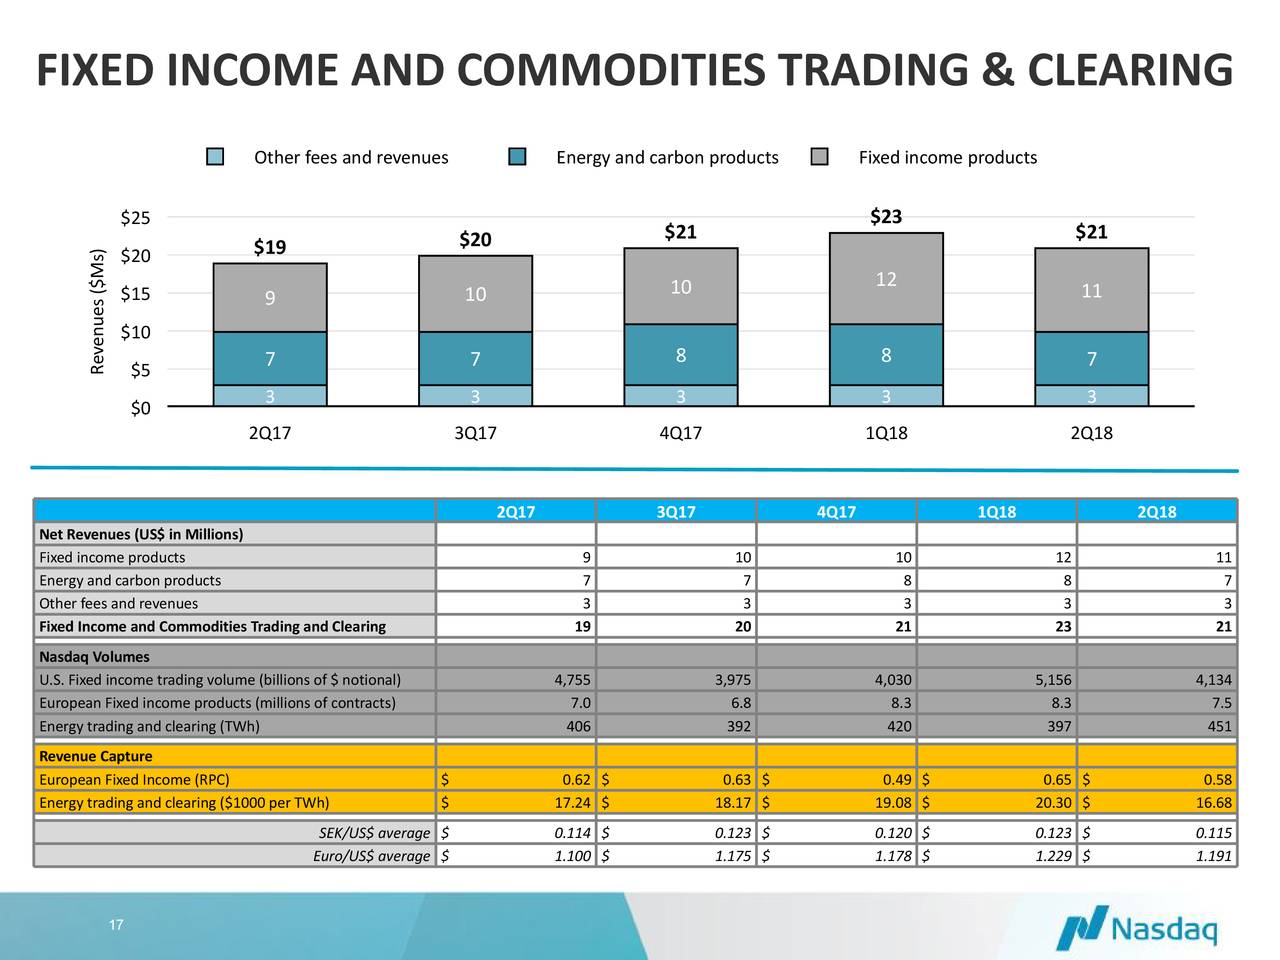 FIXED INCOME AND COMMODITIES TRADING & CLEARING